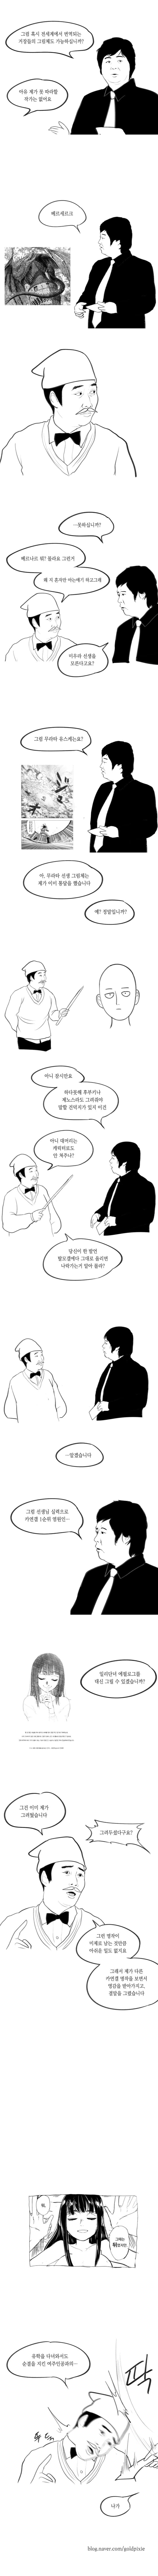 Only the master of tracing, manhwa.